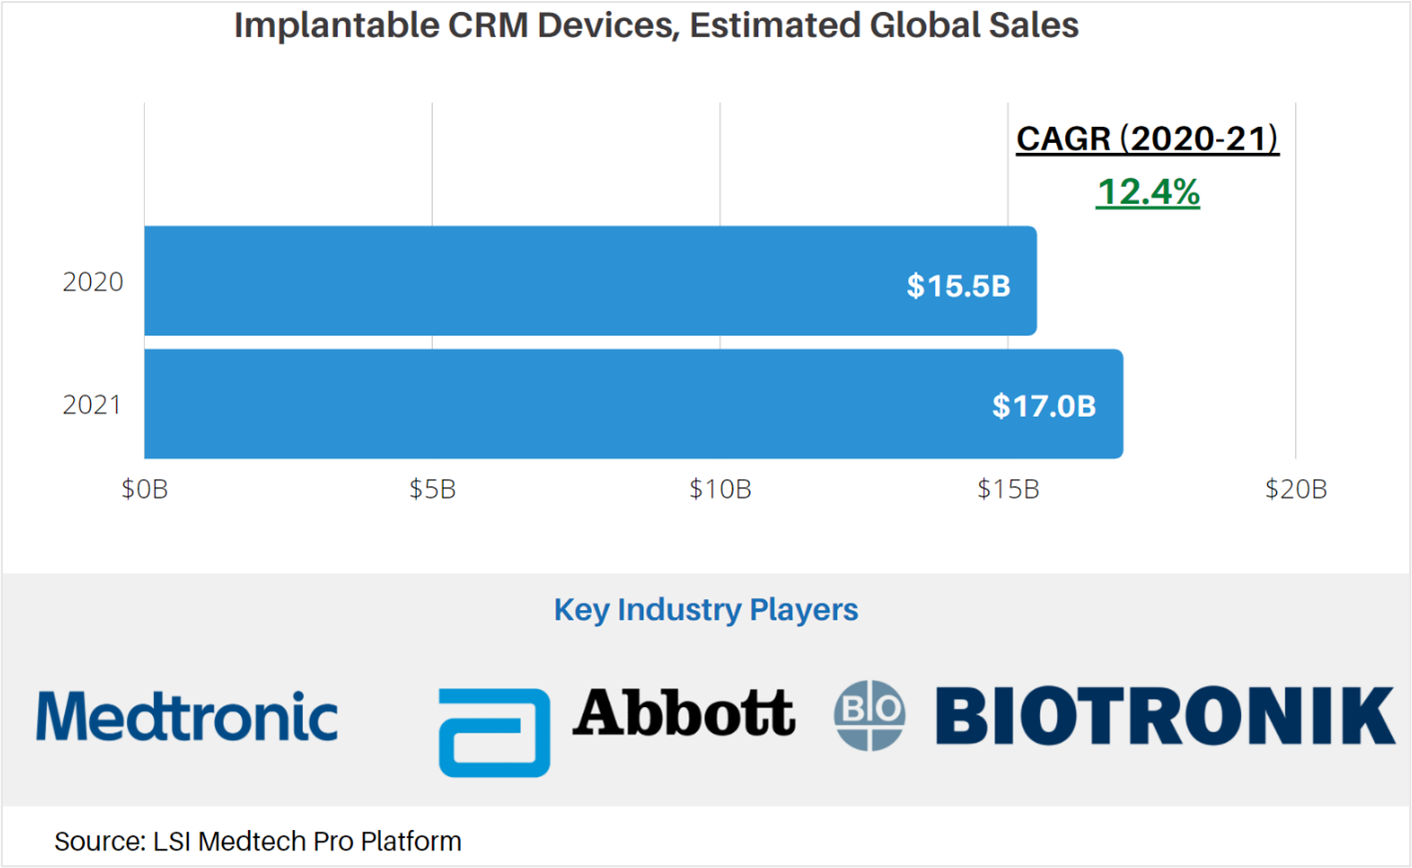 Implantable CRM Devices, Estimated Global Sales